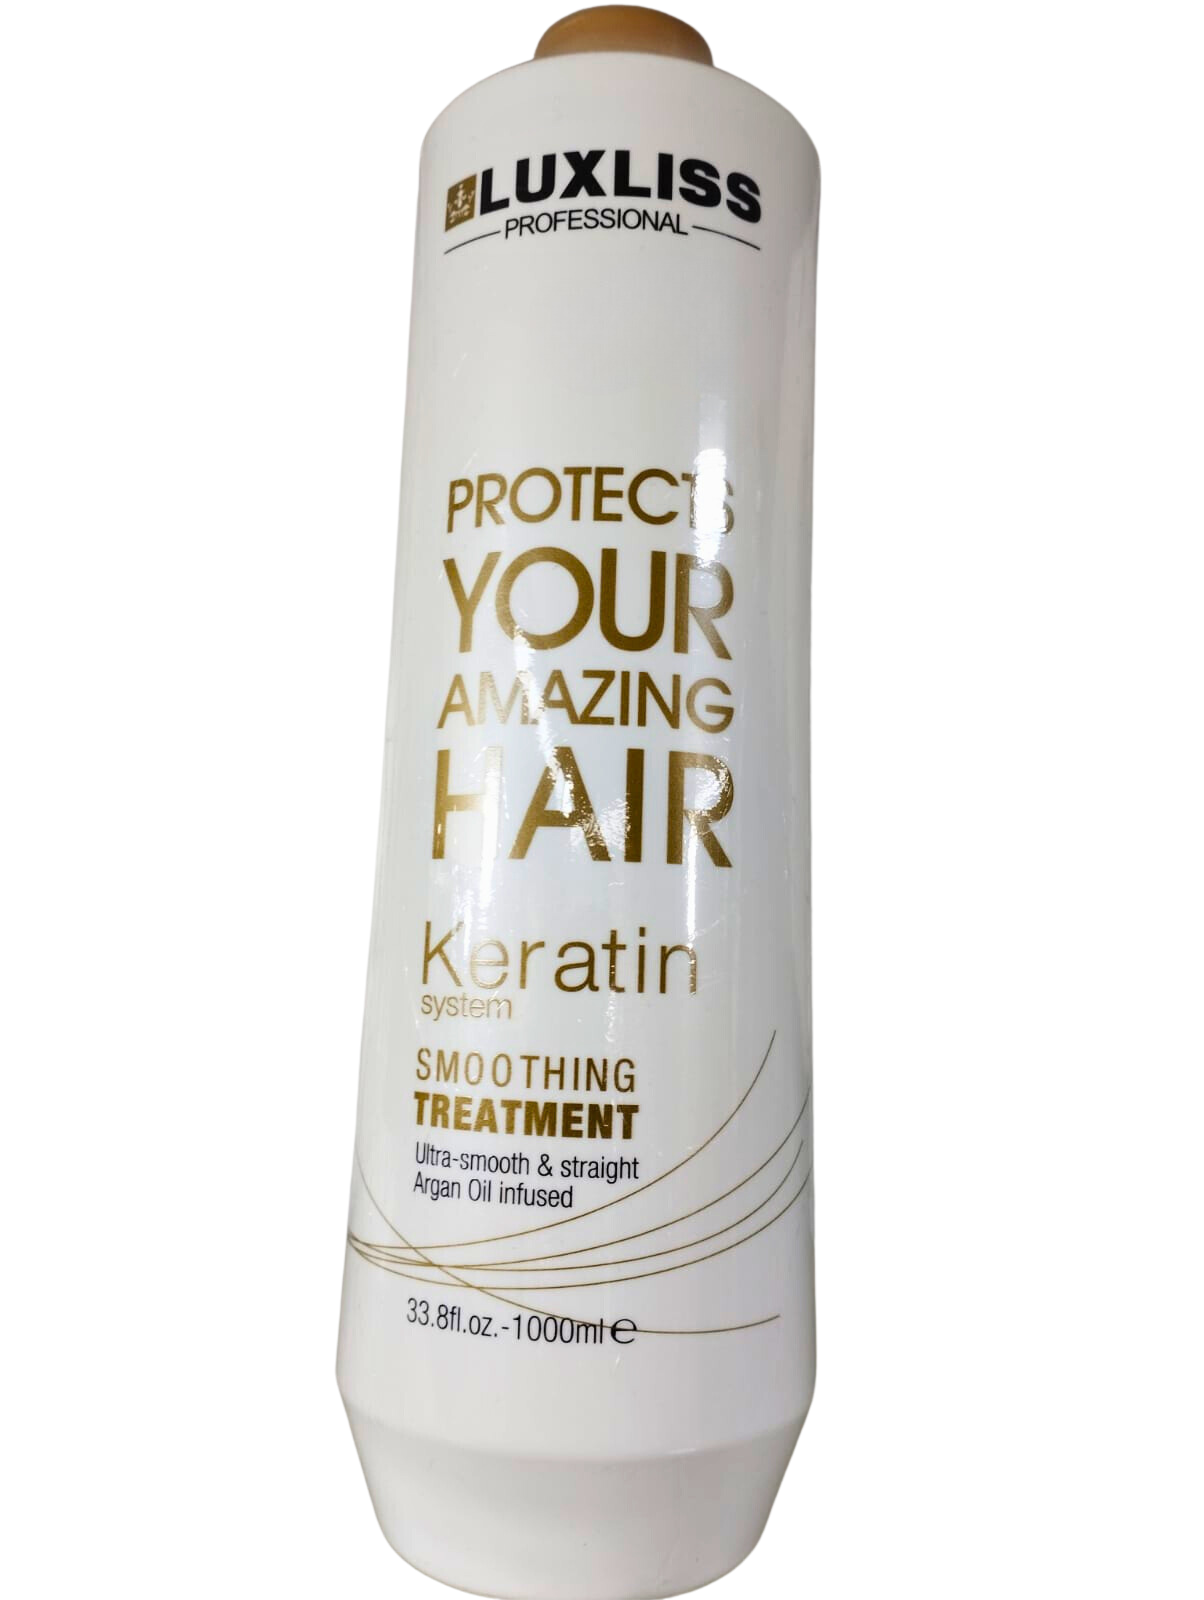 Luxliss Protects Your Amazing Hair Keratin System